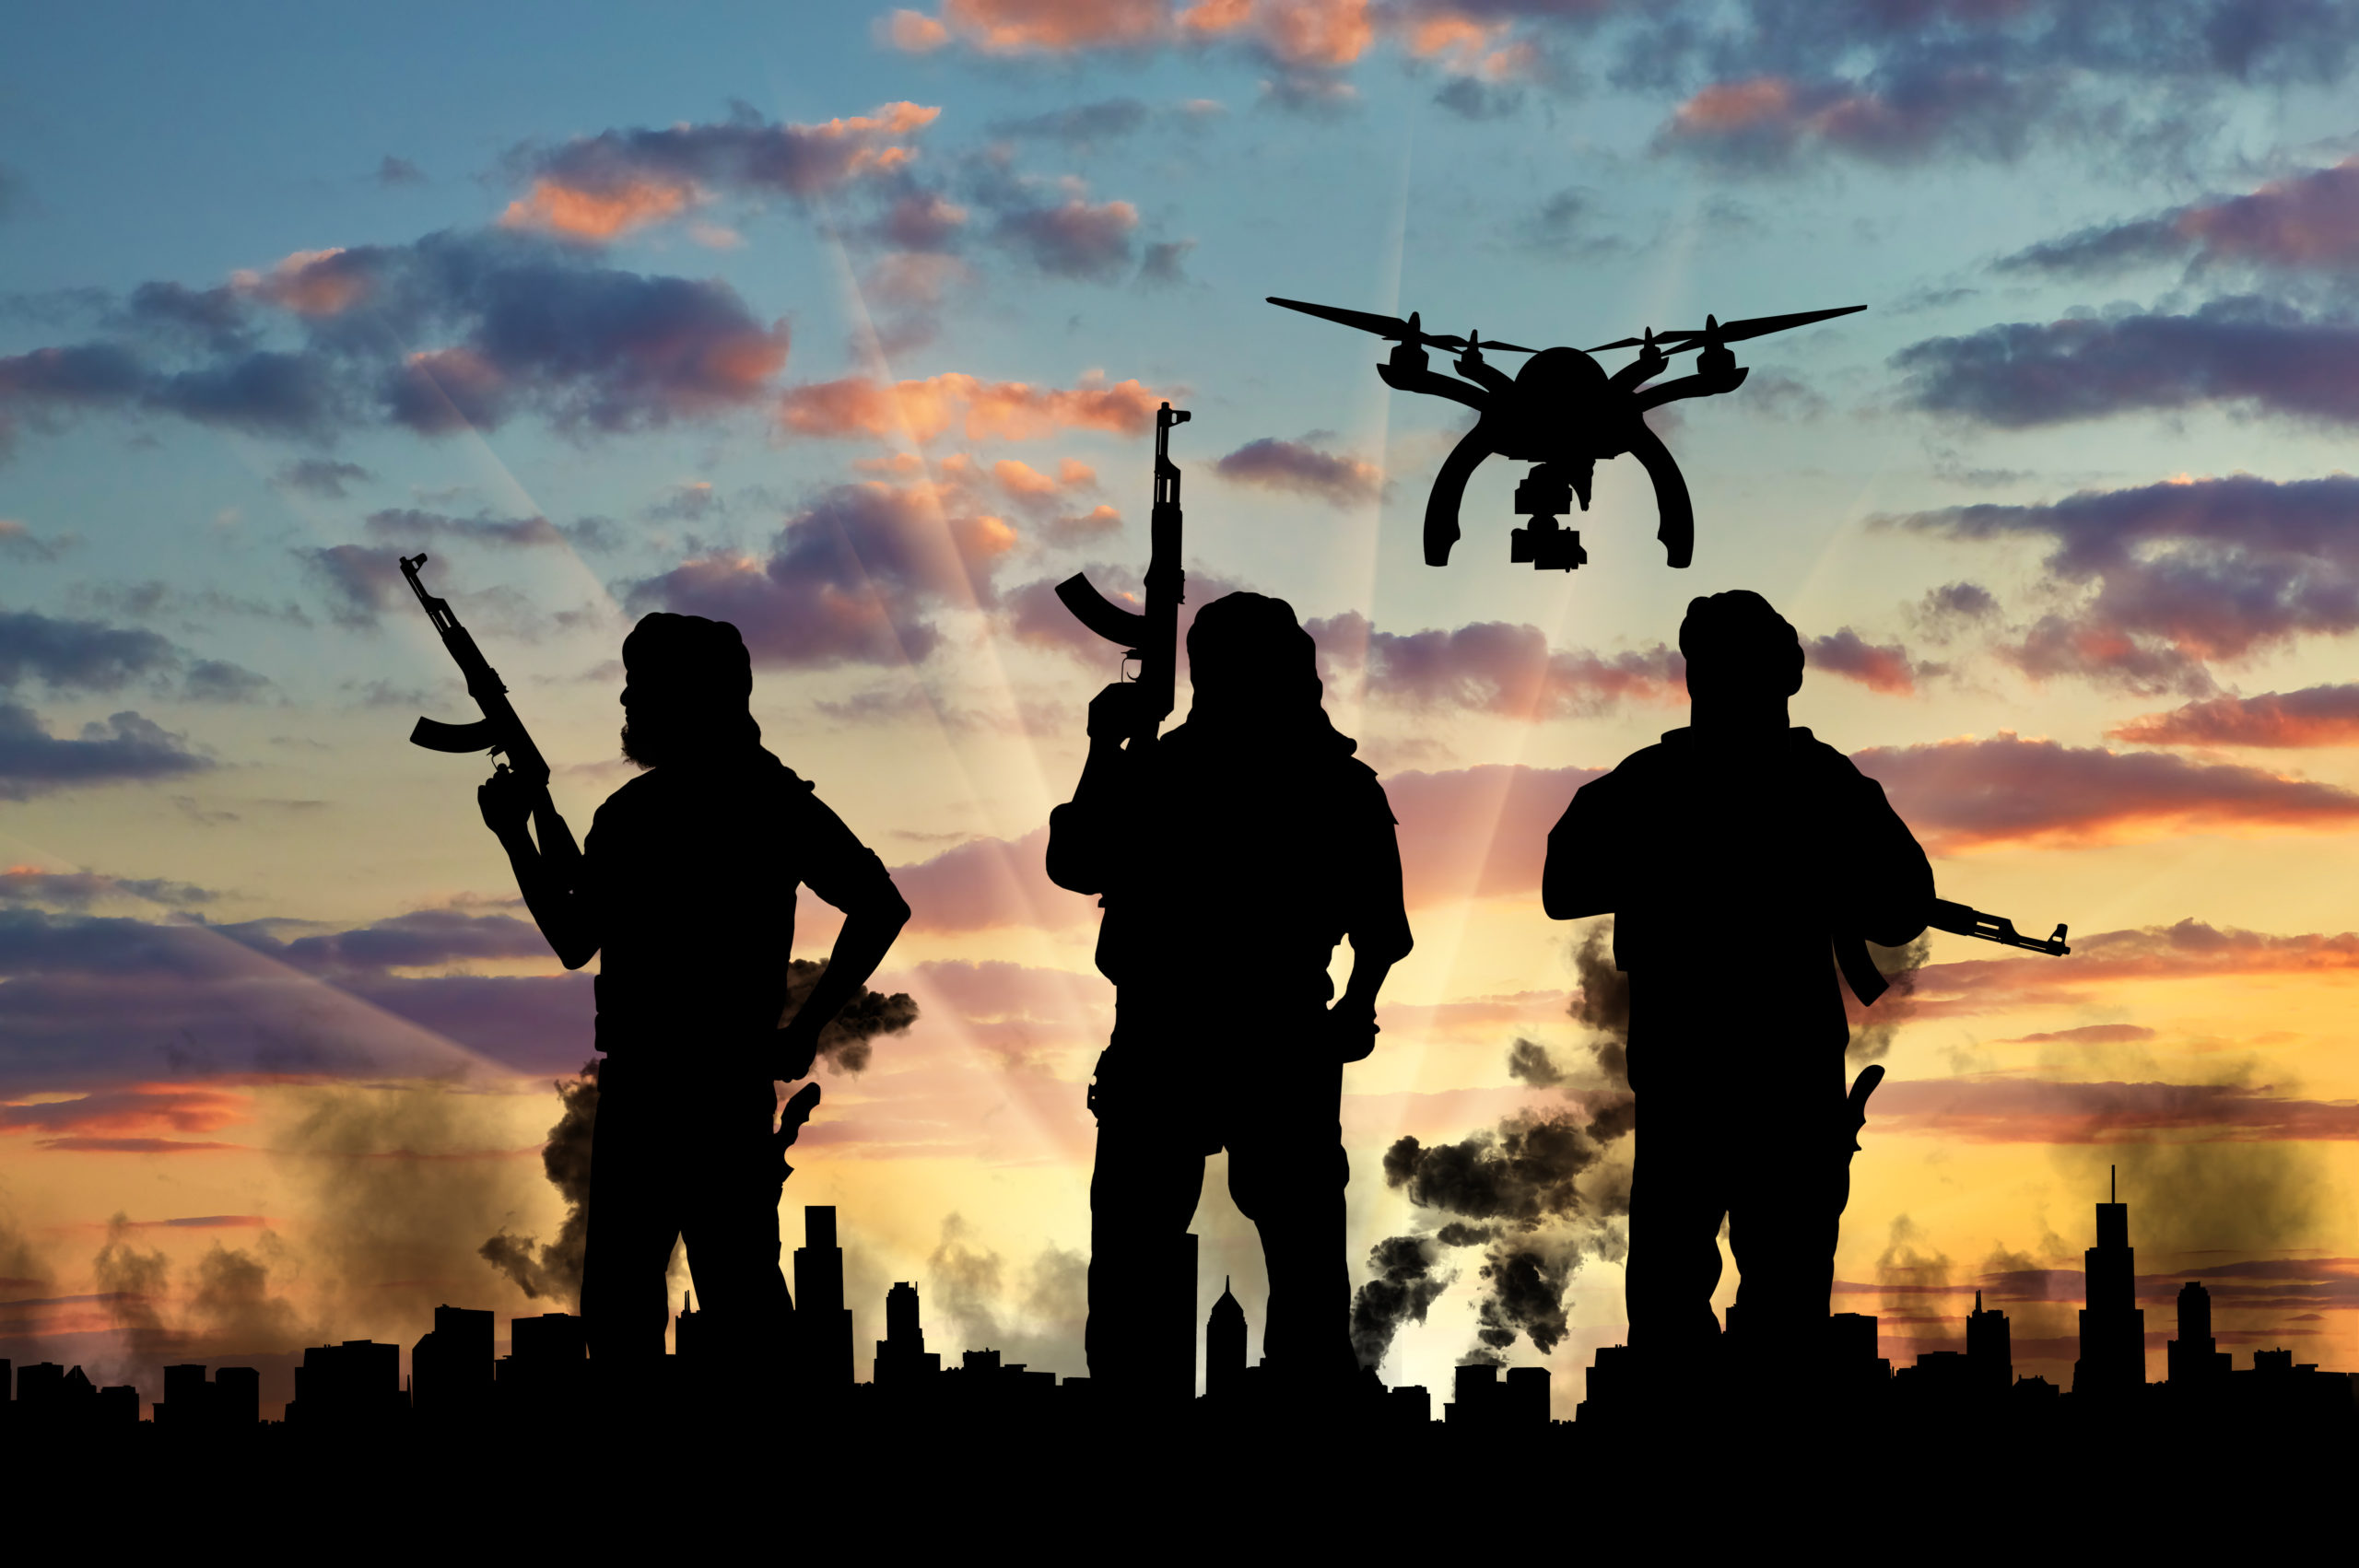 Trends in Terrorism: What’s on the Horizon in 2021?